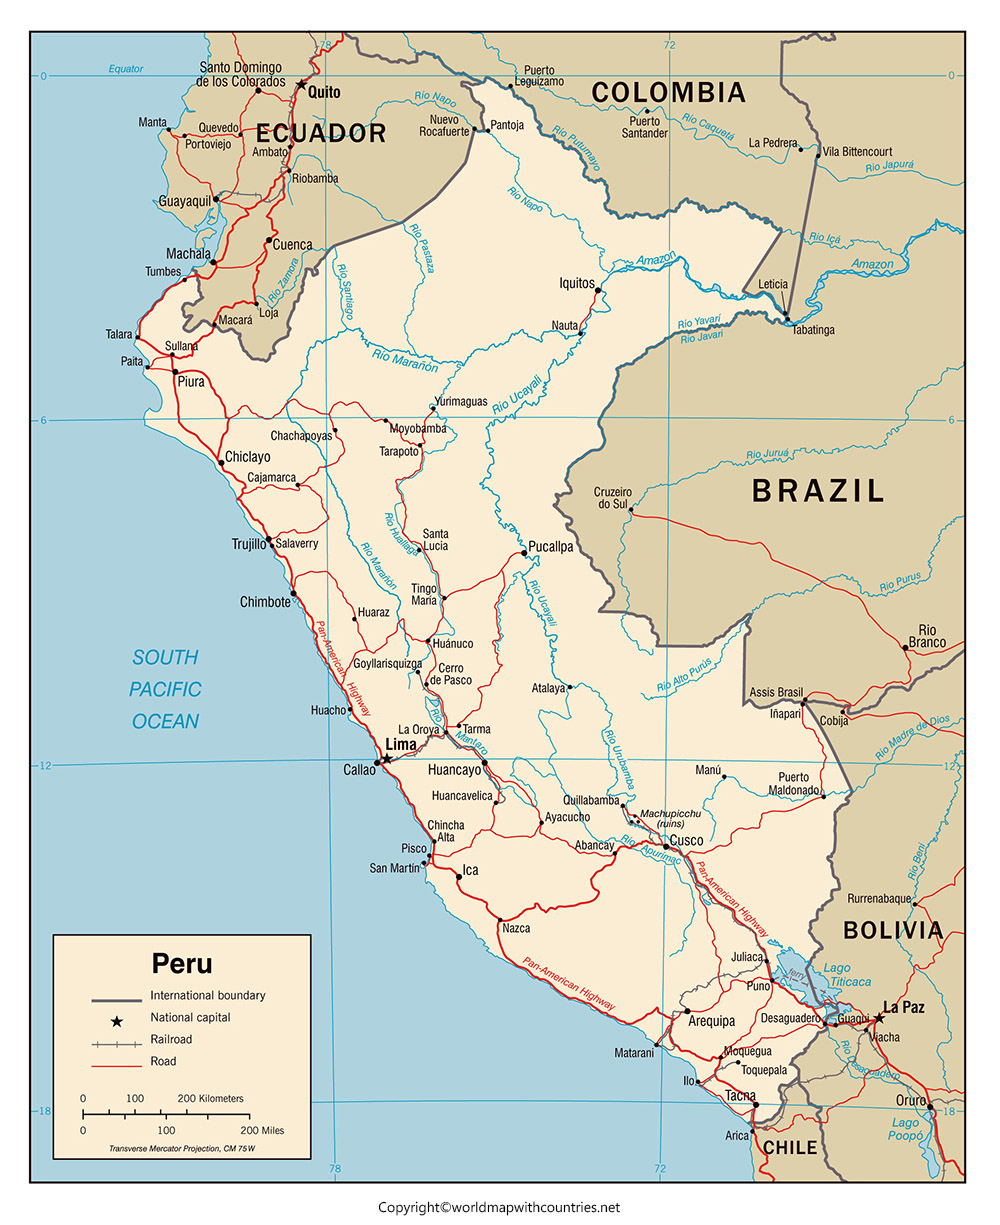 Labeled Map of Peru | World Map With Countries